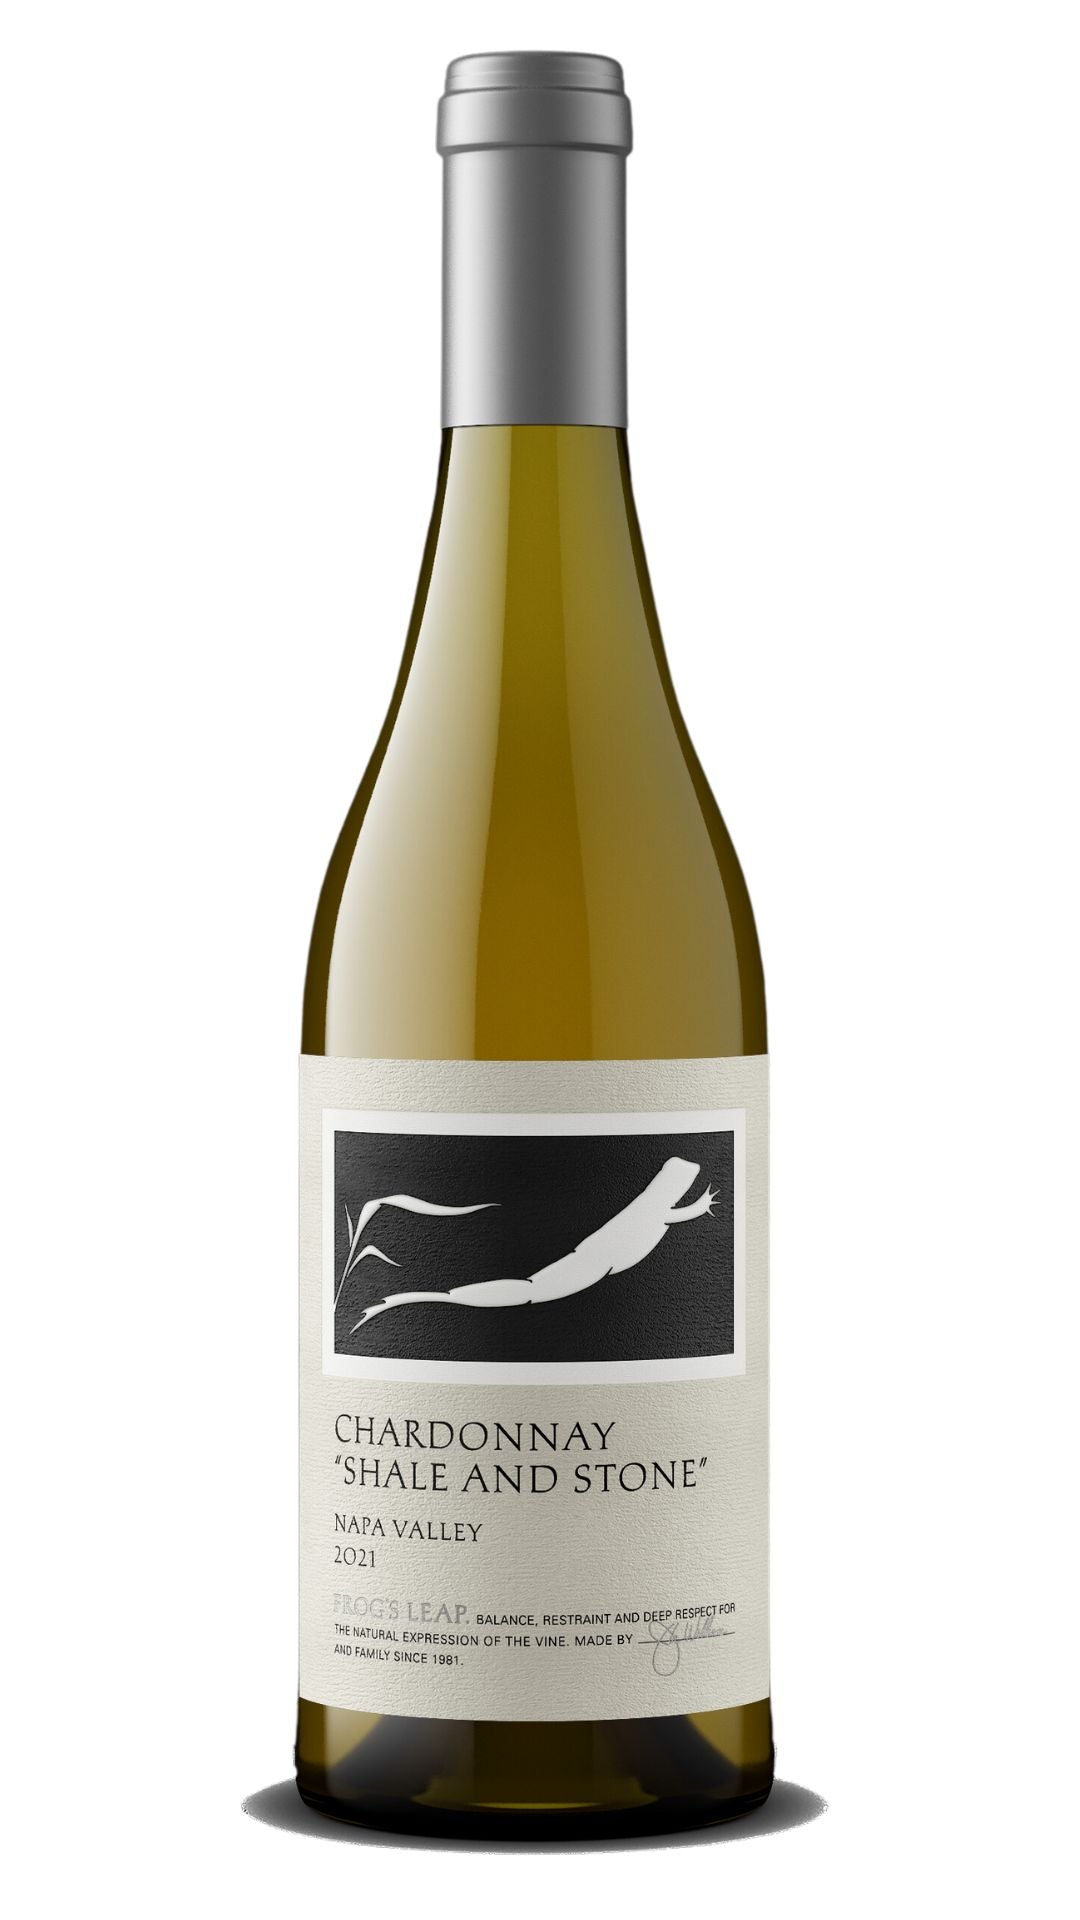 2021 Frog's Leap "Shale and Stone" Chardonnay Napa Valley - Harvest Wine Shop